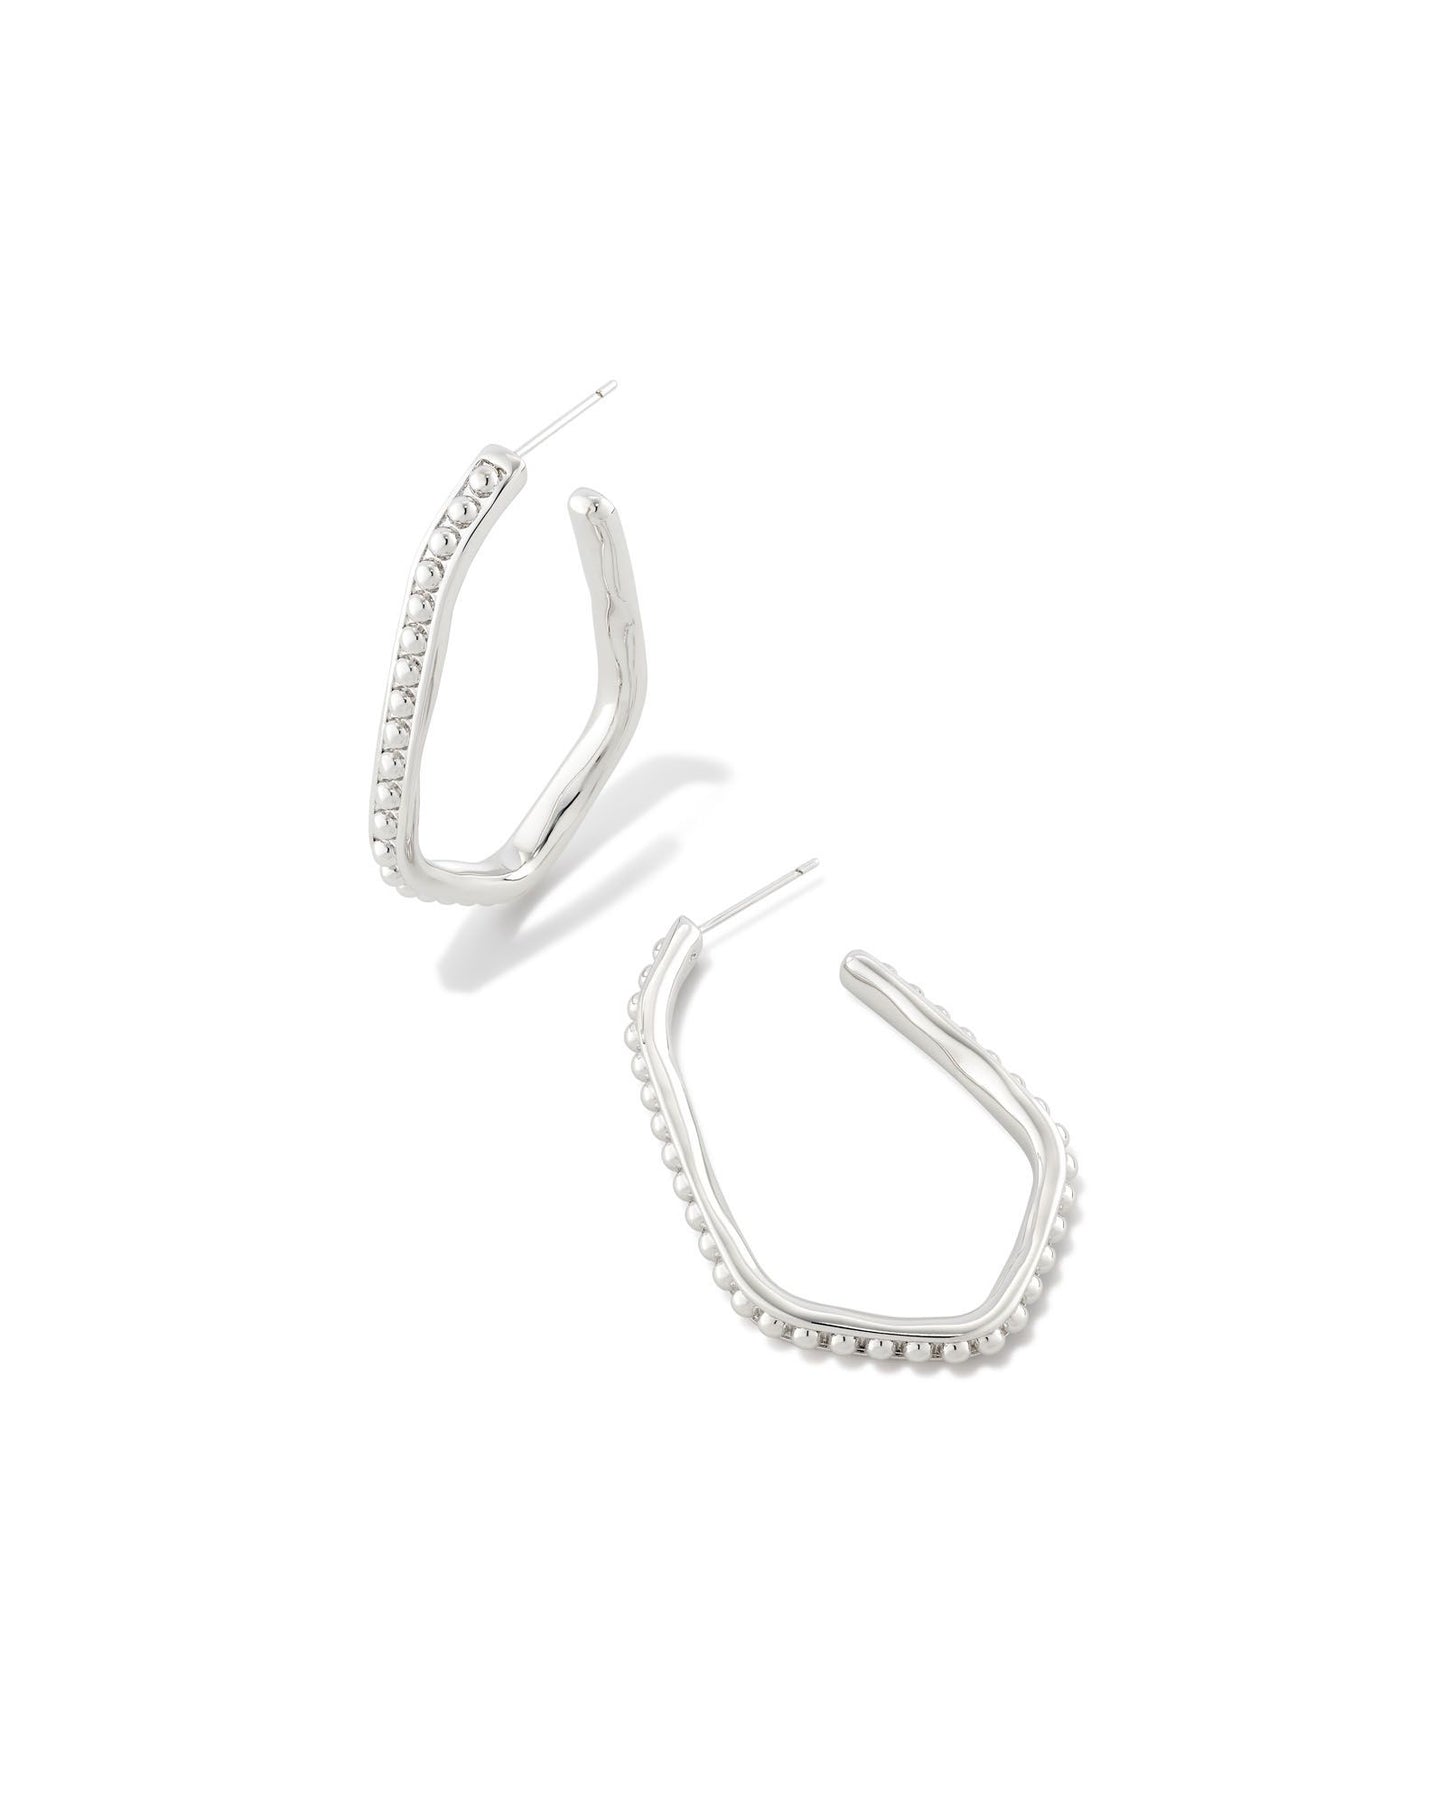 This eye-catching elongated hoop design is perfect for shaking up your look. With textured metal beads and a face-framing shape, the Lonnie Beaded Hoop Earrings in Gold go with any sense of style. These are silver colored. 